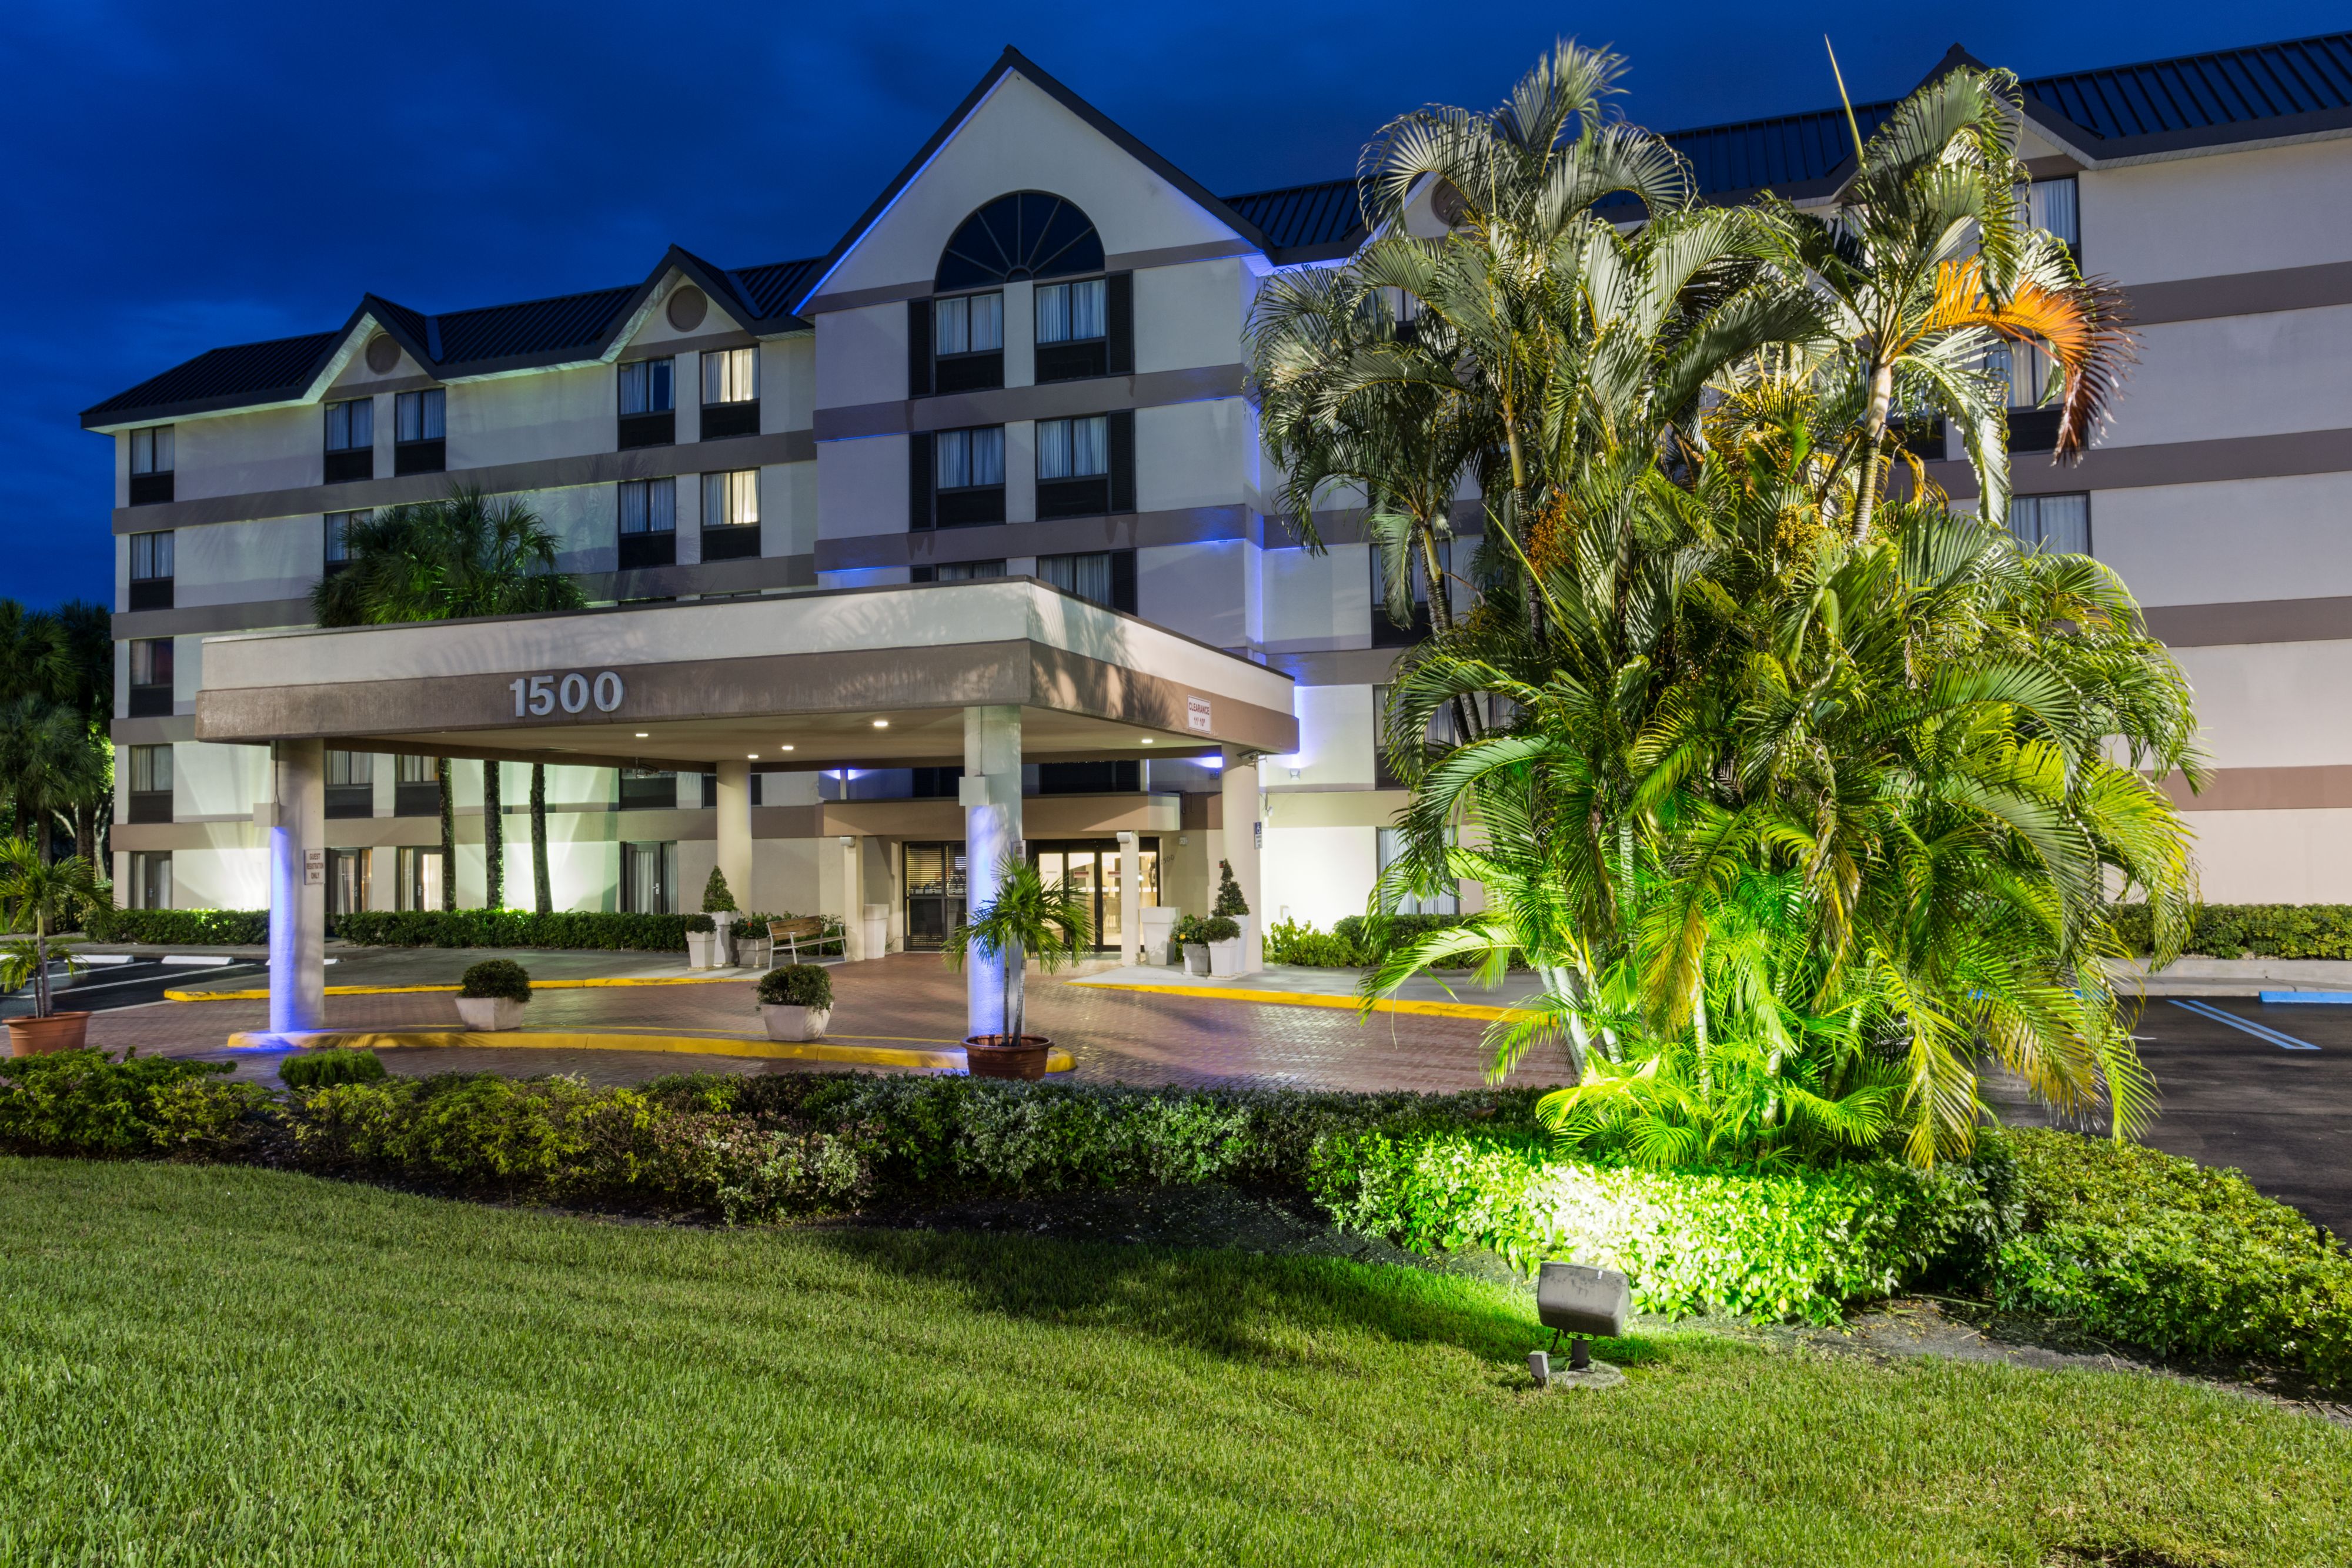 holiday-inn-express-and-suites-fort-lauderdale-3184015771-original.jpg